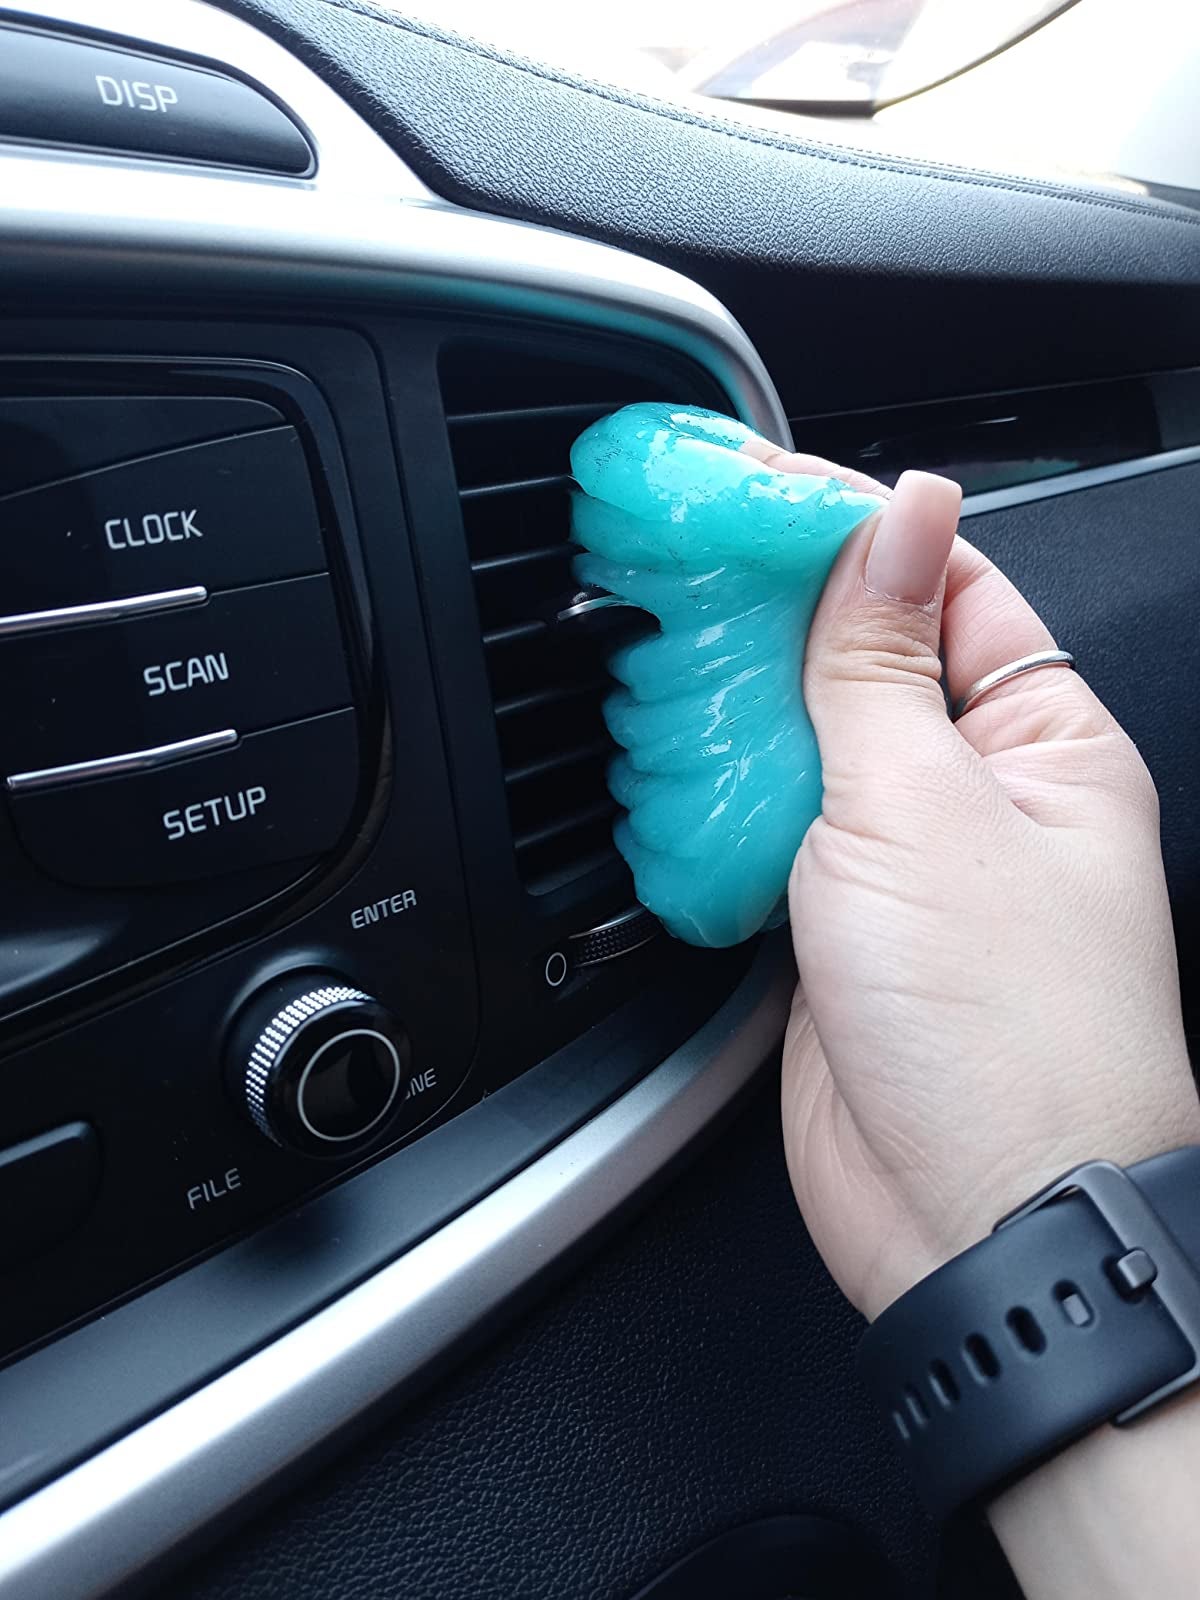 Reviewer's photo of the gel cleaner being used on a car air vent